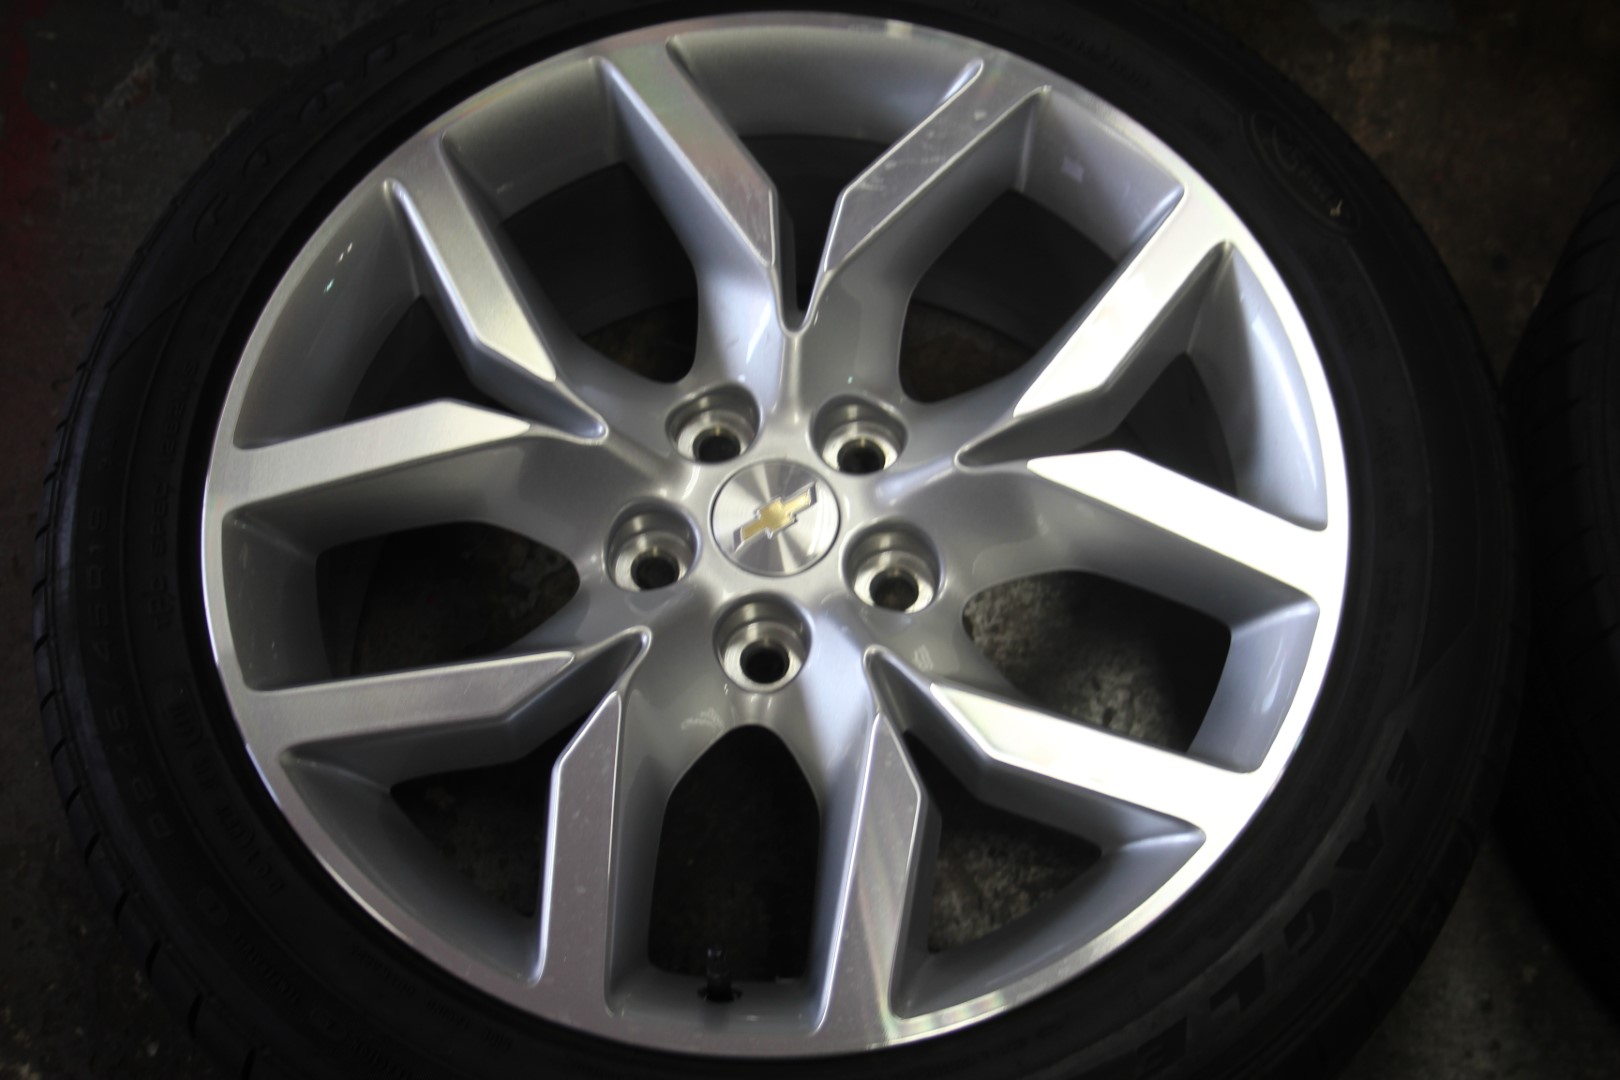 Set of 4 Chevrolet Impala 2014 2015 2016 2017 2018 19" OEM 245/45/19 Rims Tires 4018 What Size Tires Are On A 2017 Chevy Impala